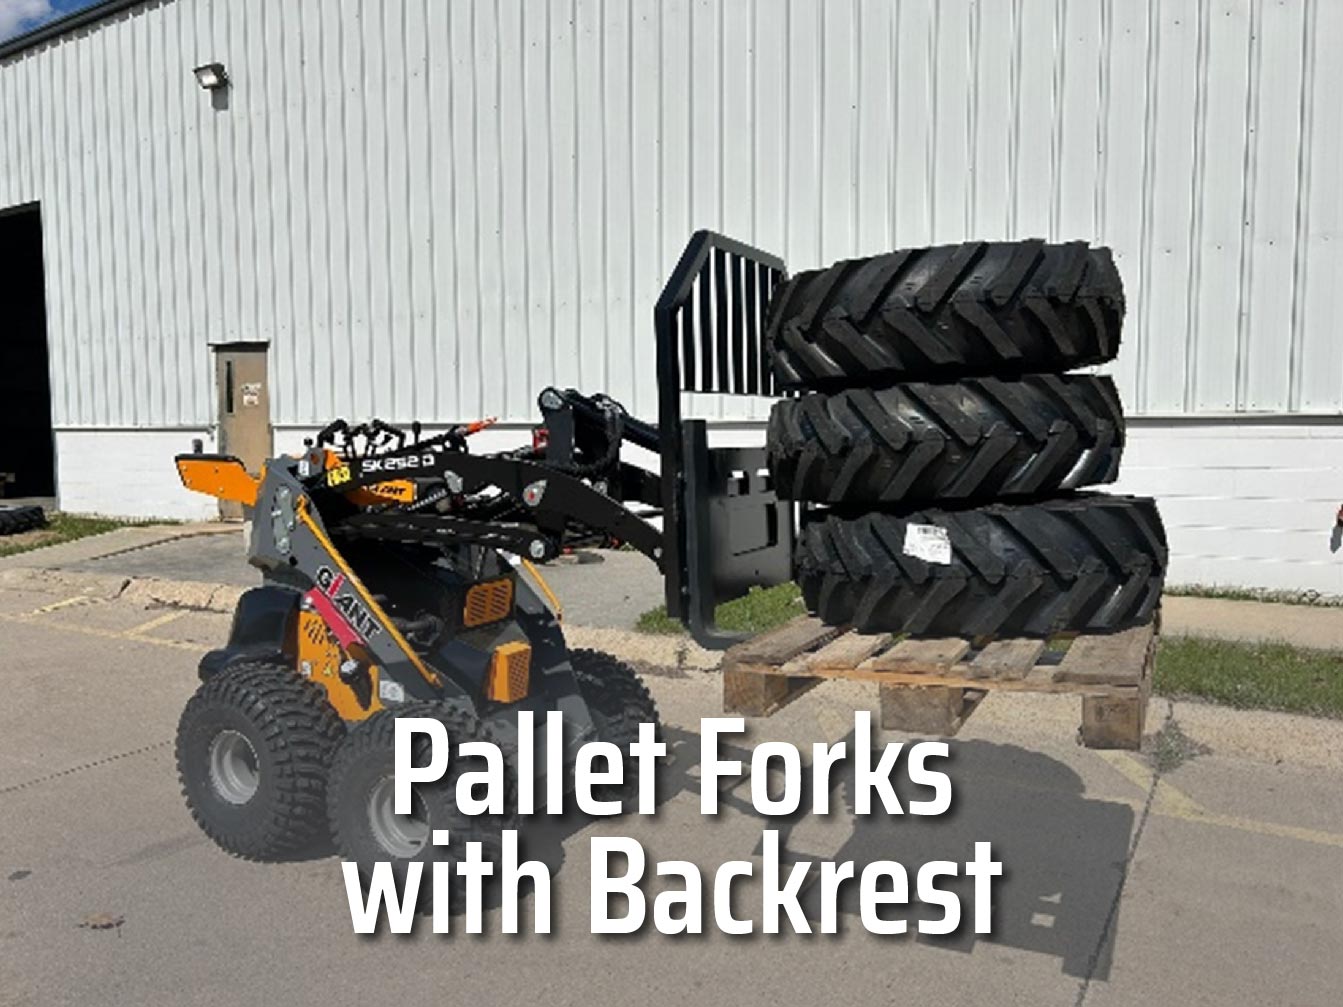 Small Tractor GiANT<br />
GS900+ Pallet Forks with Backrest<br />
Carrying 3 Tractor Tires Outside warehouse